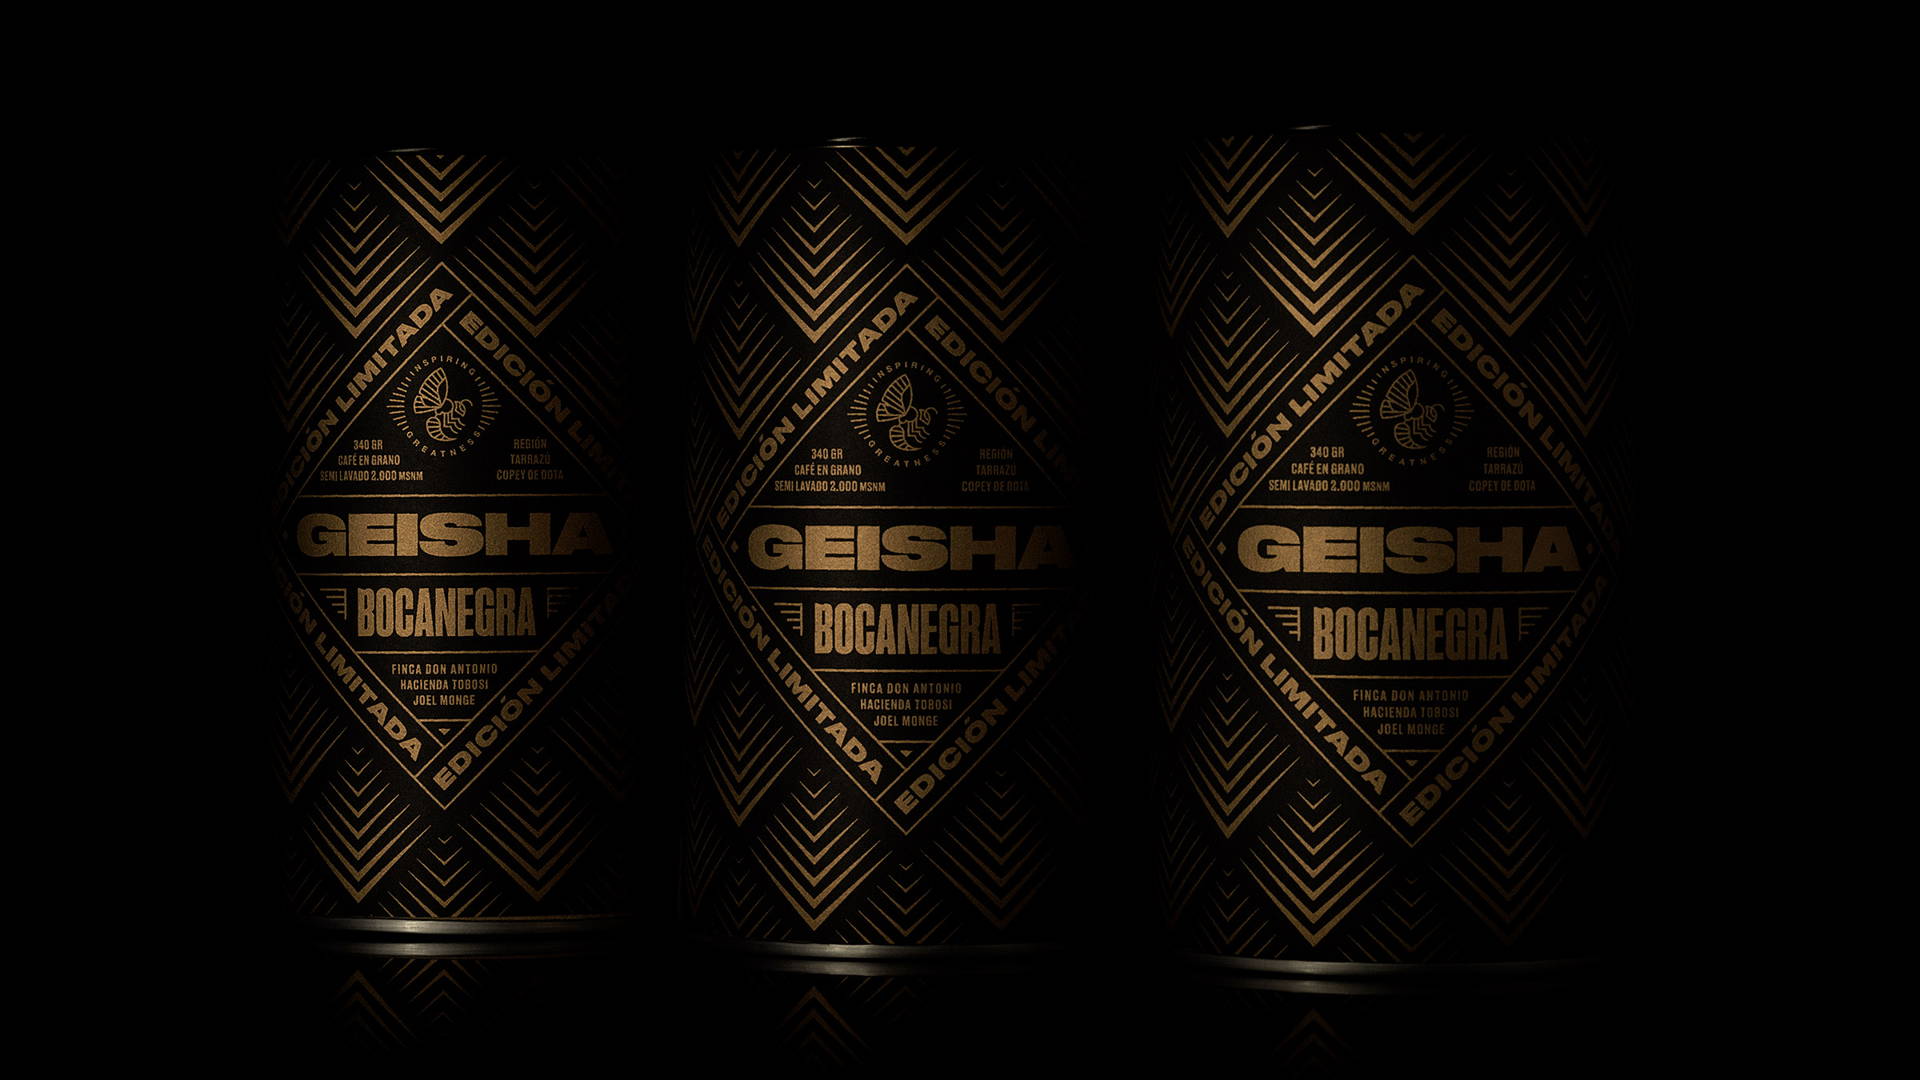 Featured image for Geisha Bocanegra is a Premium Small Batch Costa Rican Coffee That Exudes Elegance